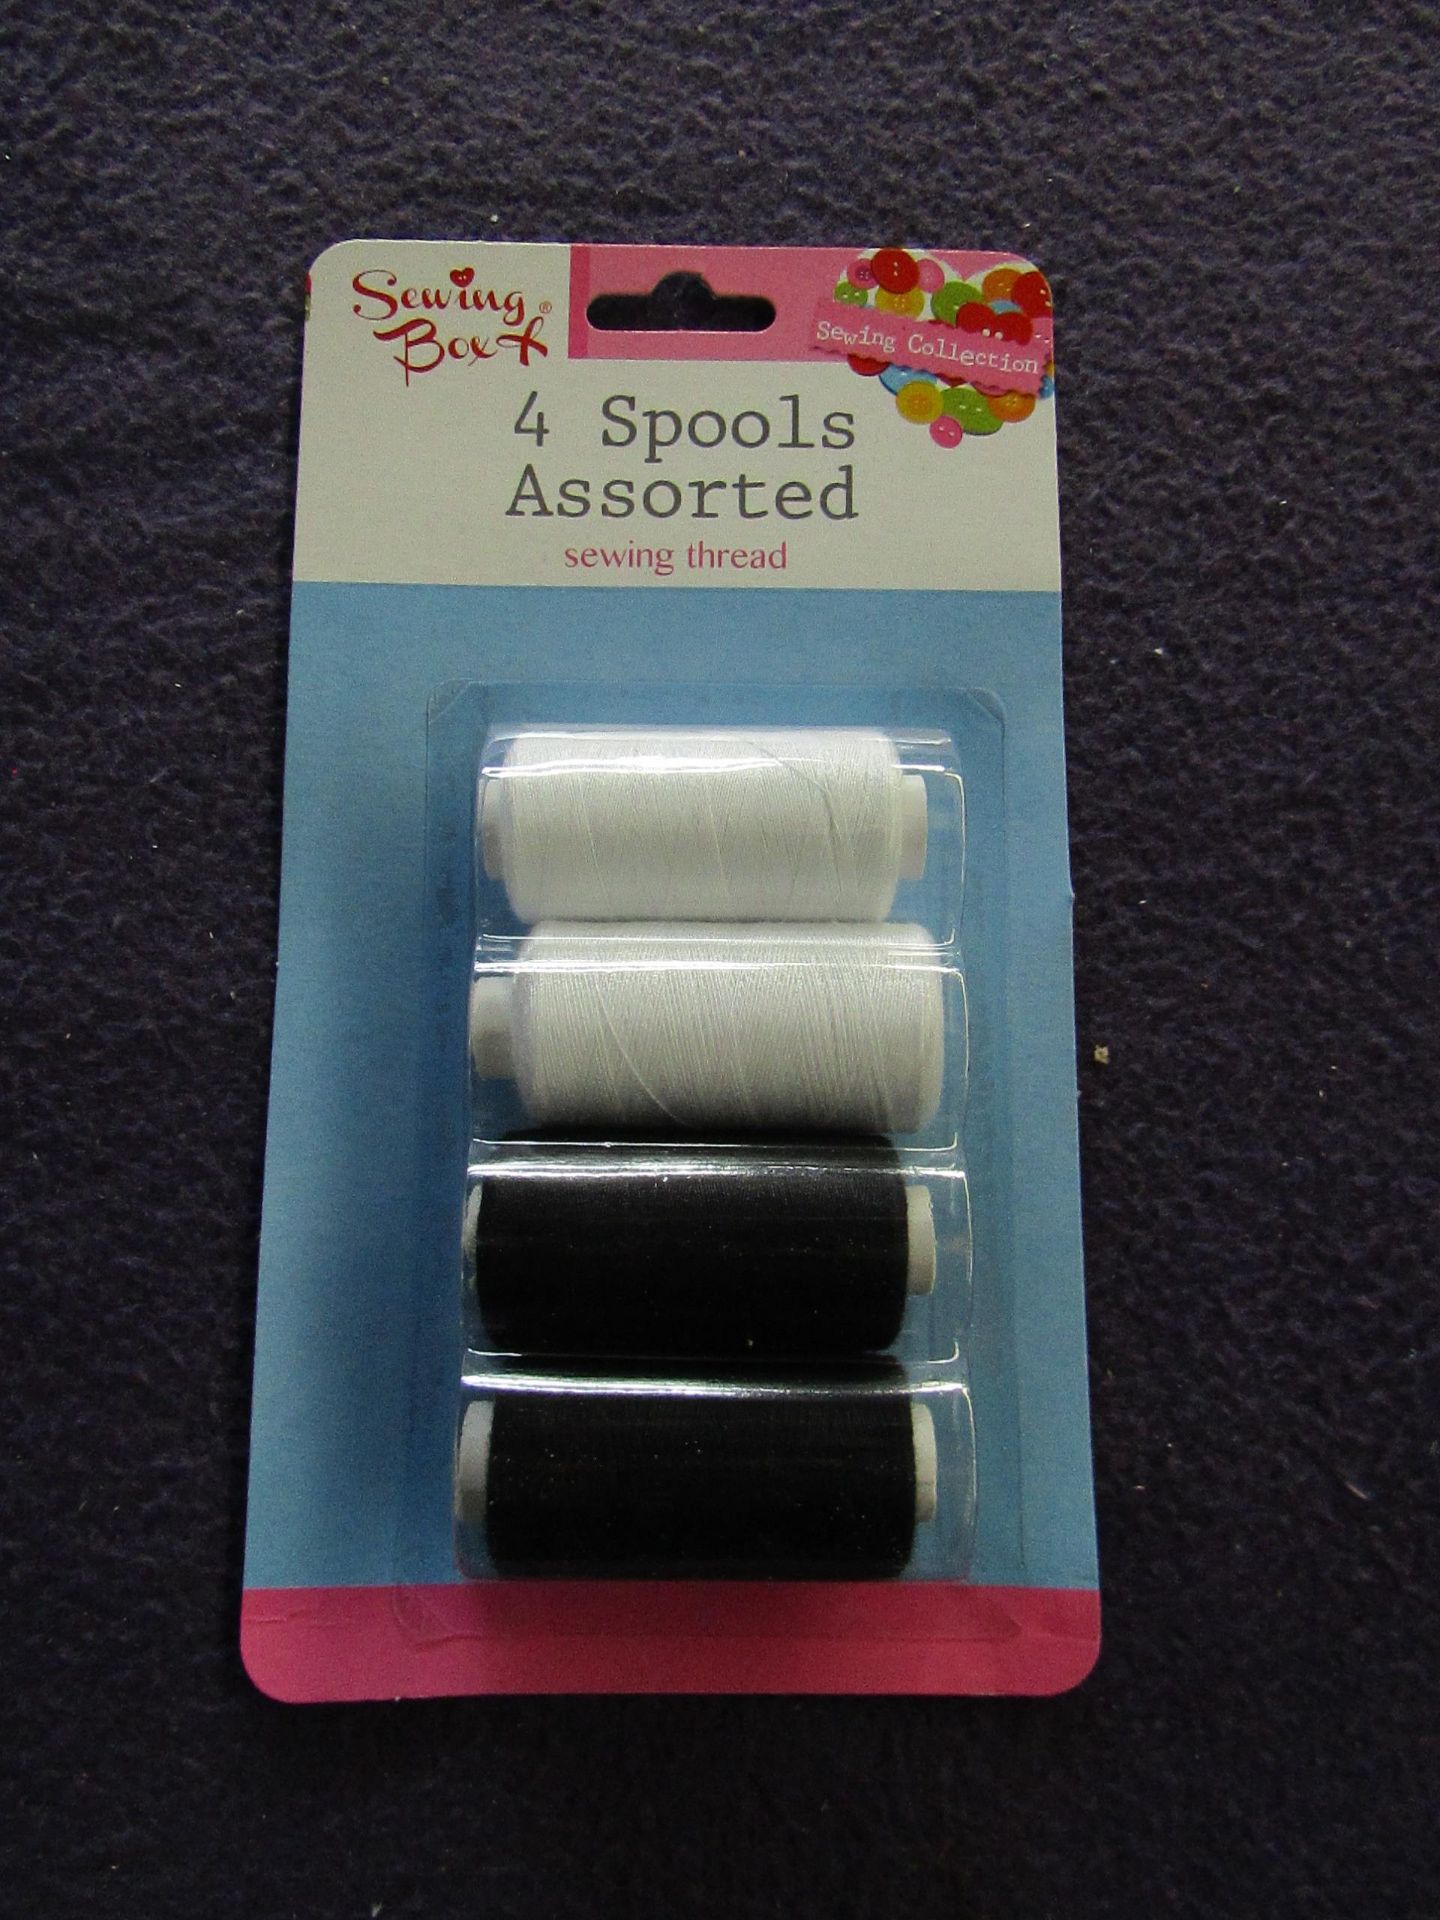 12x Sewing Box - Set of 4 Sewing Spools ( Assorted Colours ) - Unused & Boxed.